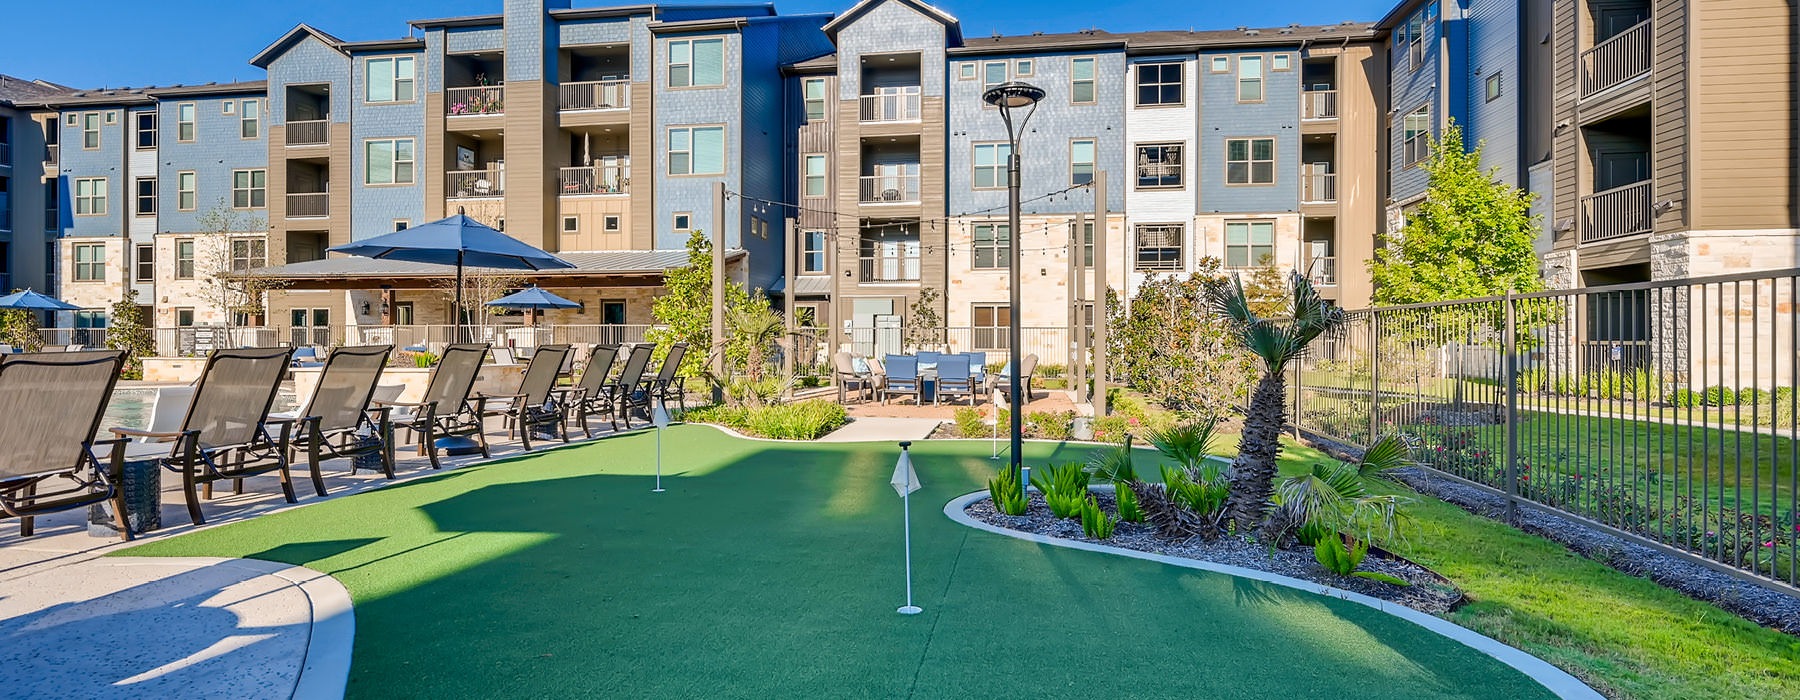 outdoor putting green adjacent to pool